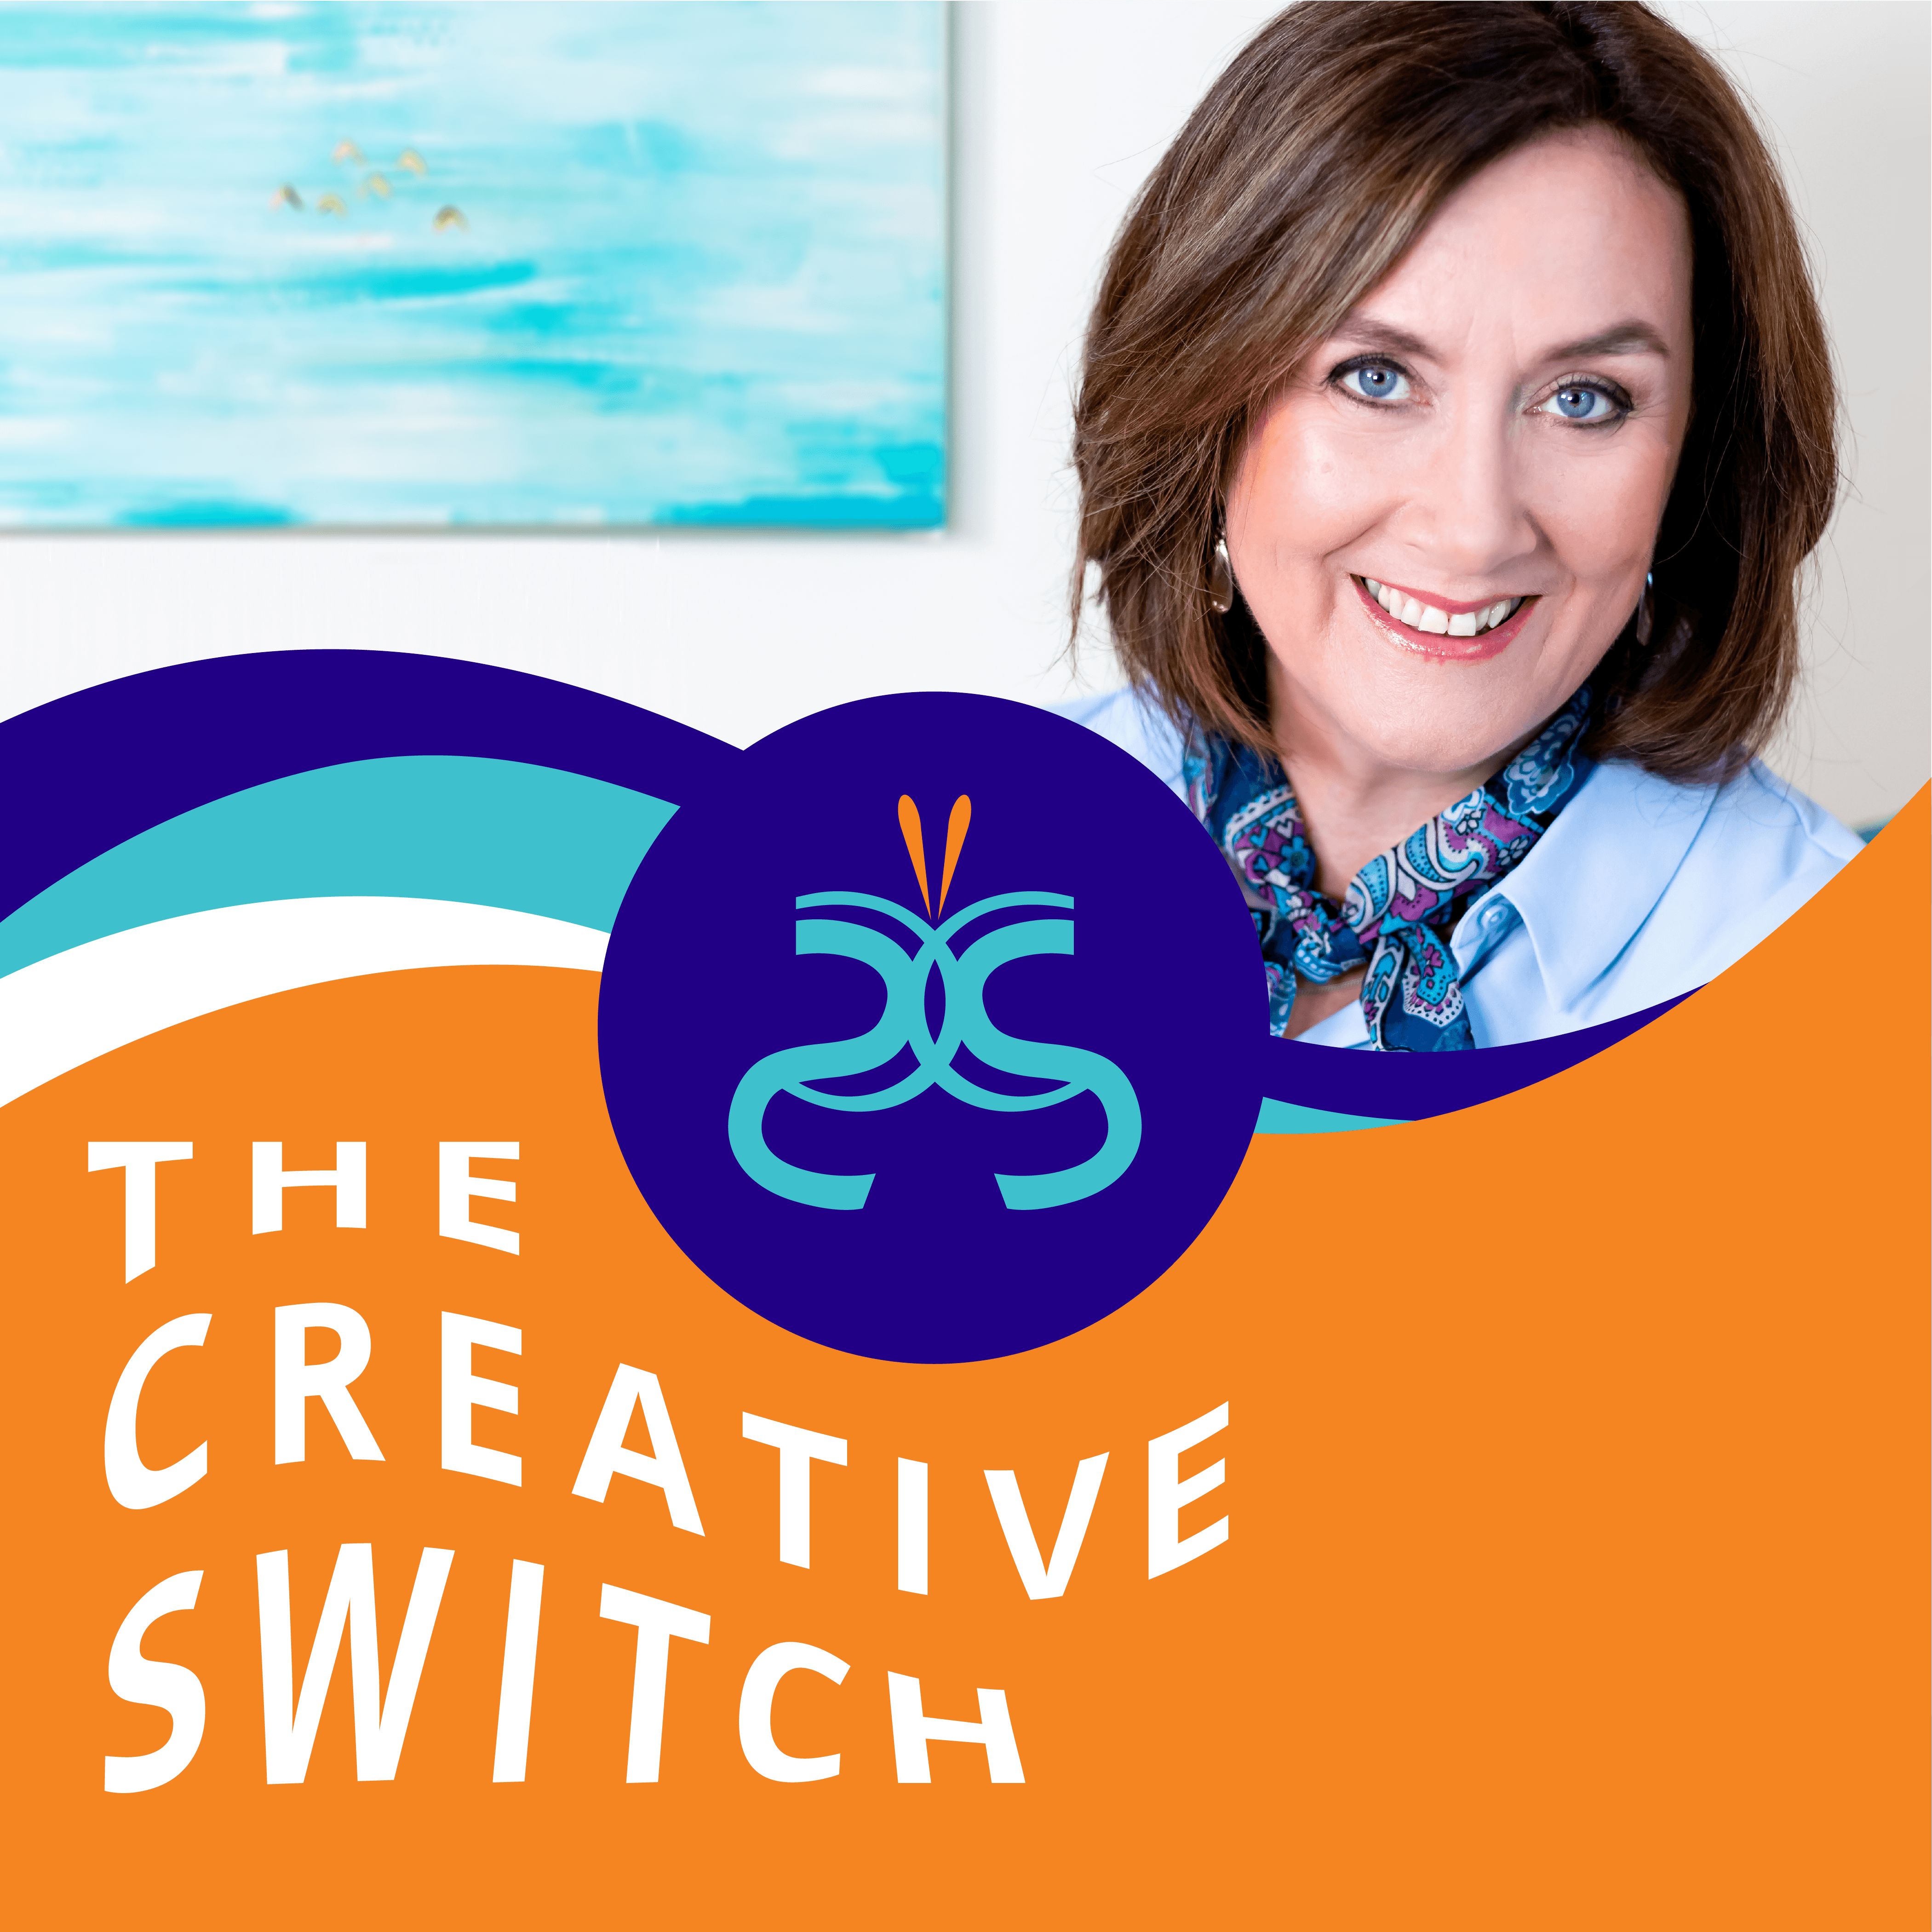 st cover image with photo of Nikki Vallance and The Creative Switch logo with waves of blue, turquoise and white and a turquoise logo on a blue circle.